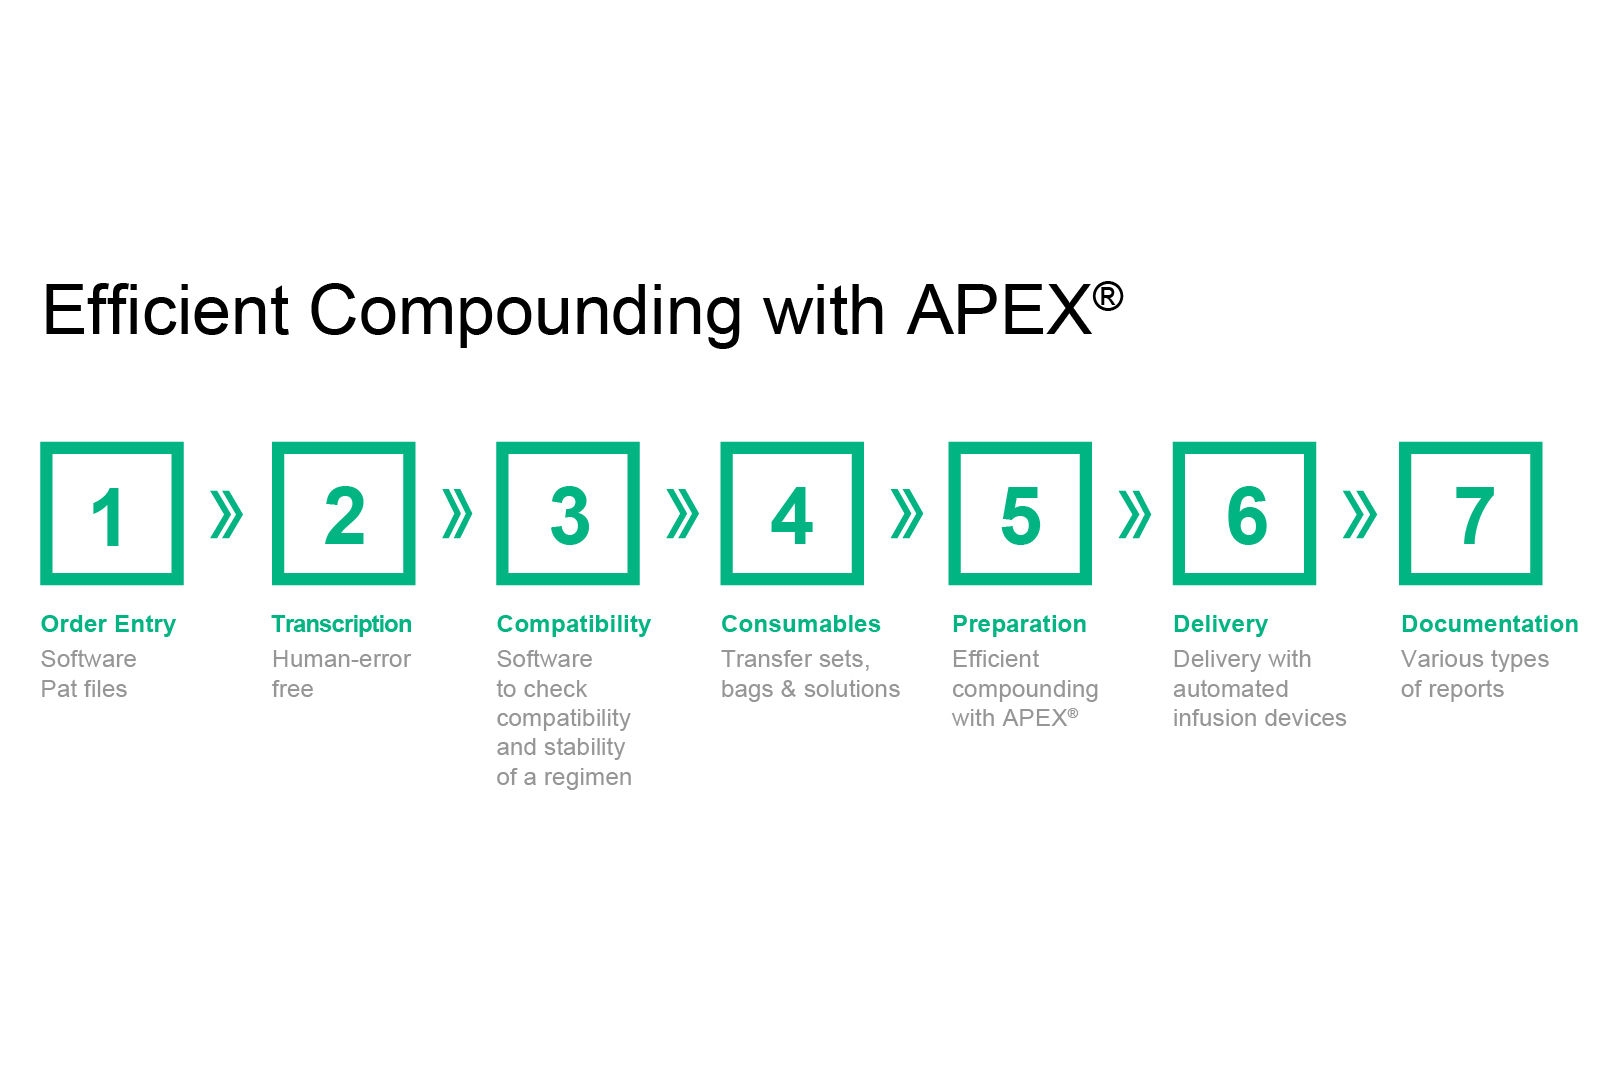 Automated Nutrition Compounding Process with APEX®